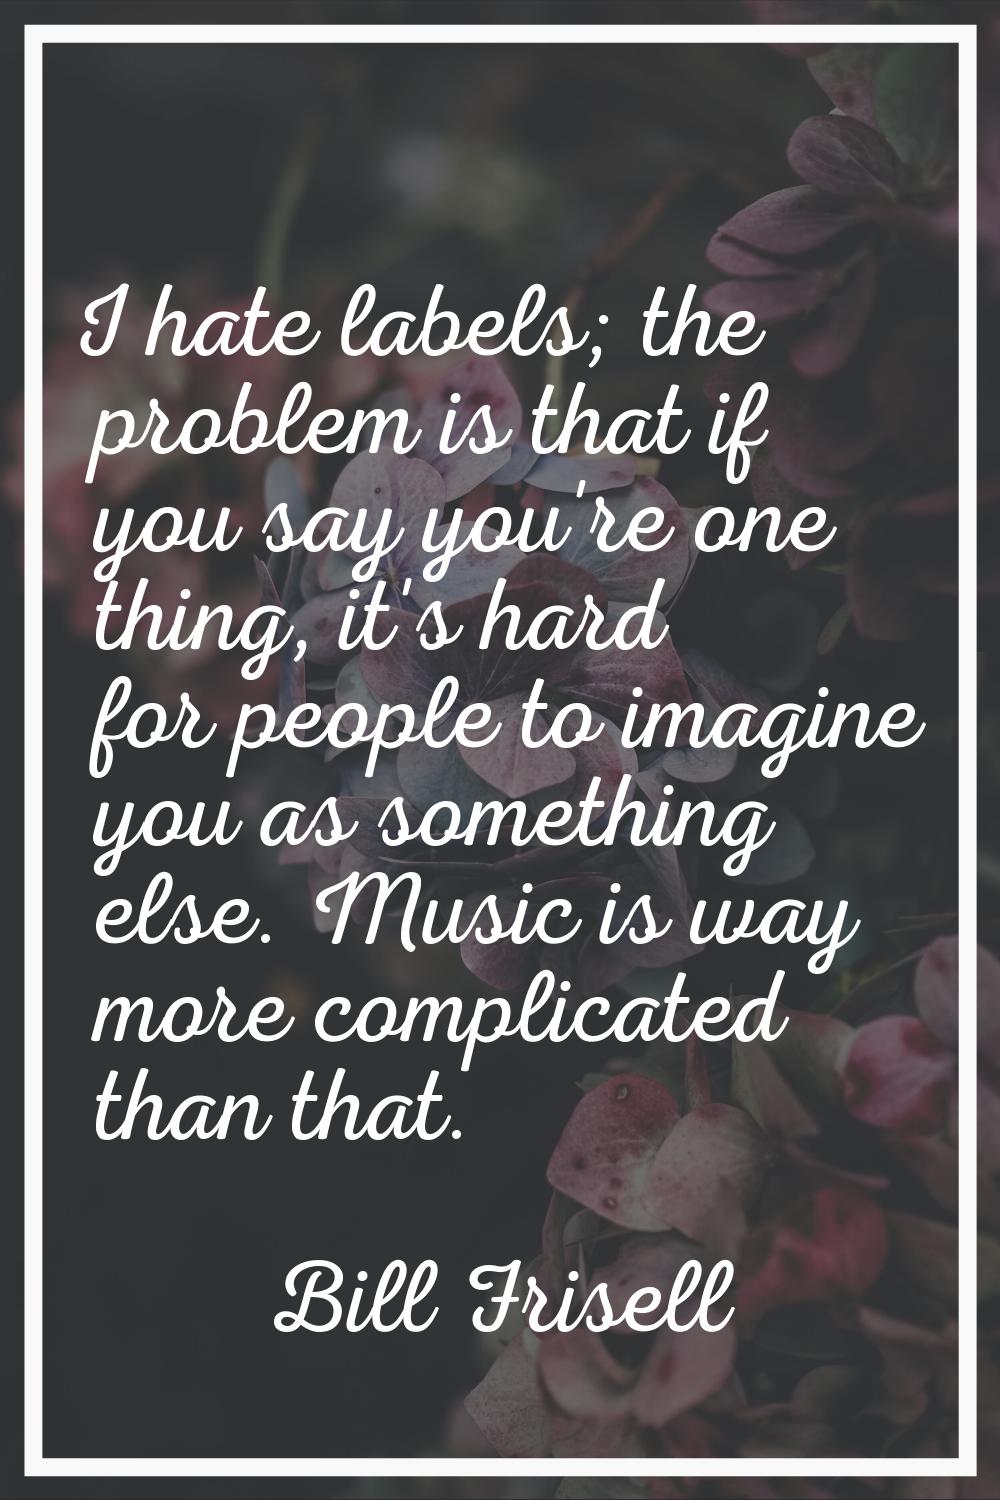 I hate labels; the problem is that if you say you're one thing, it's hard for people to imagine you